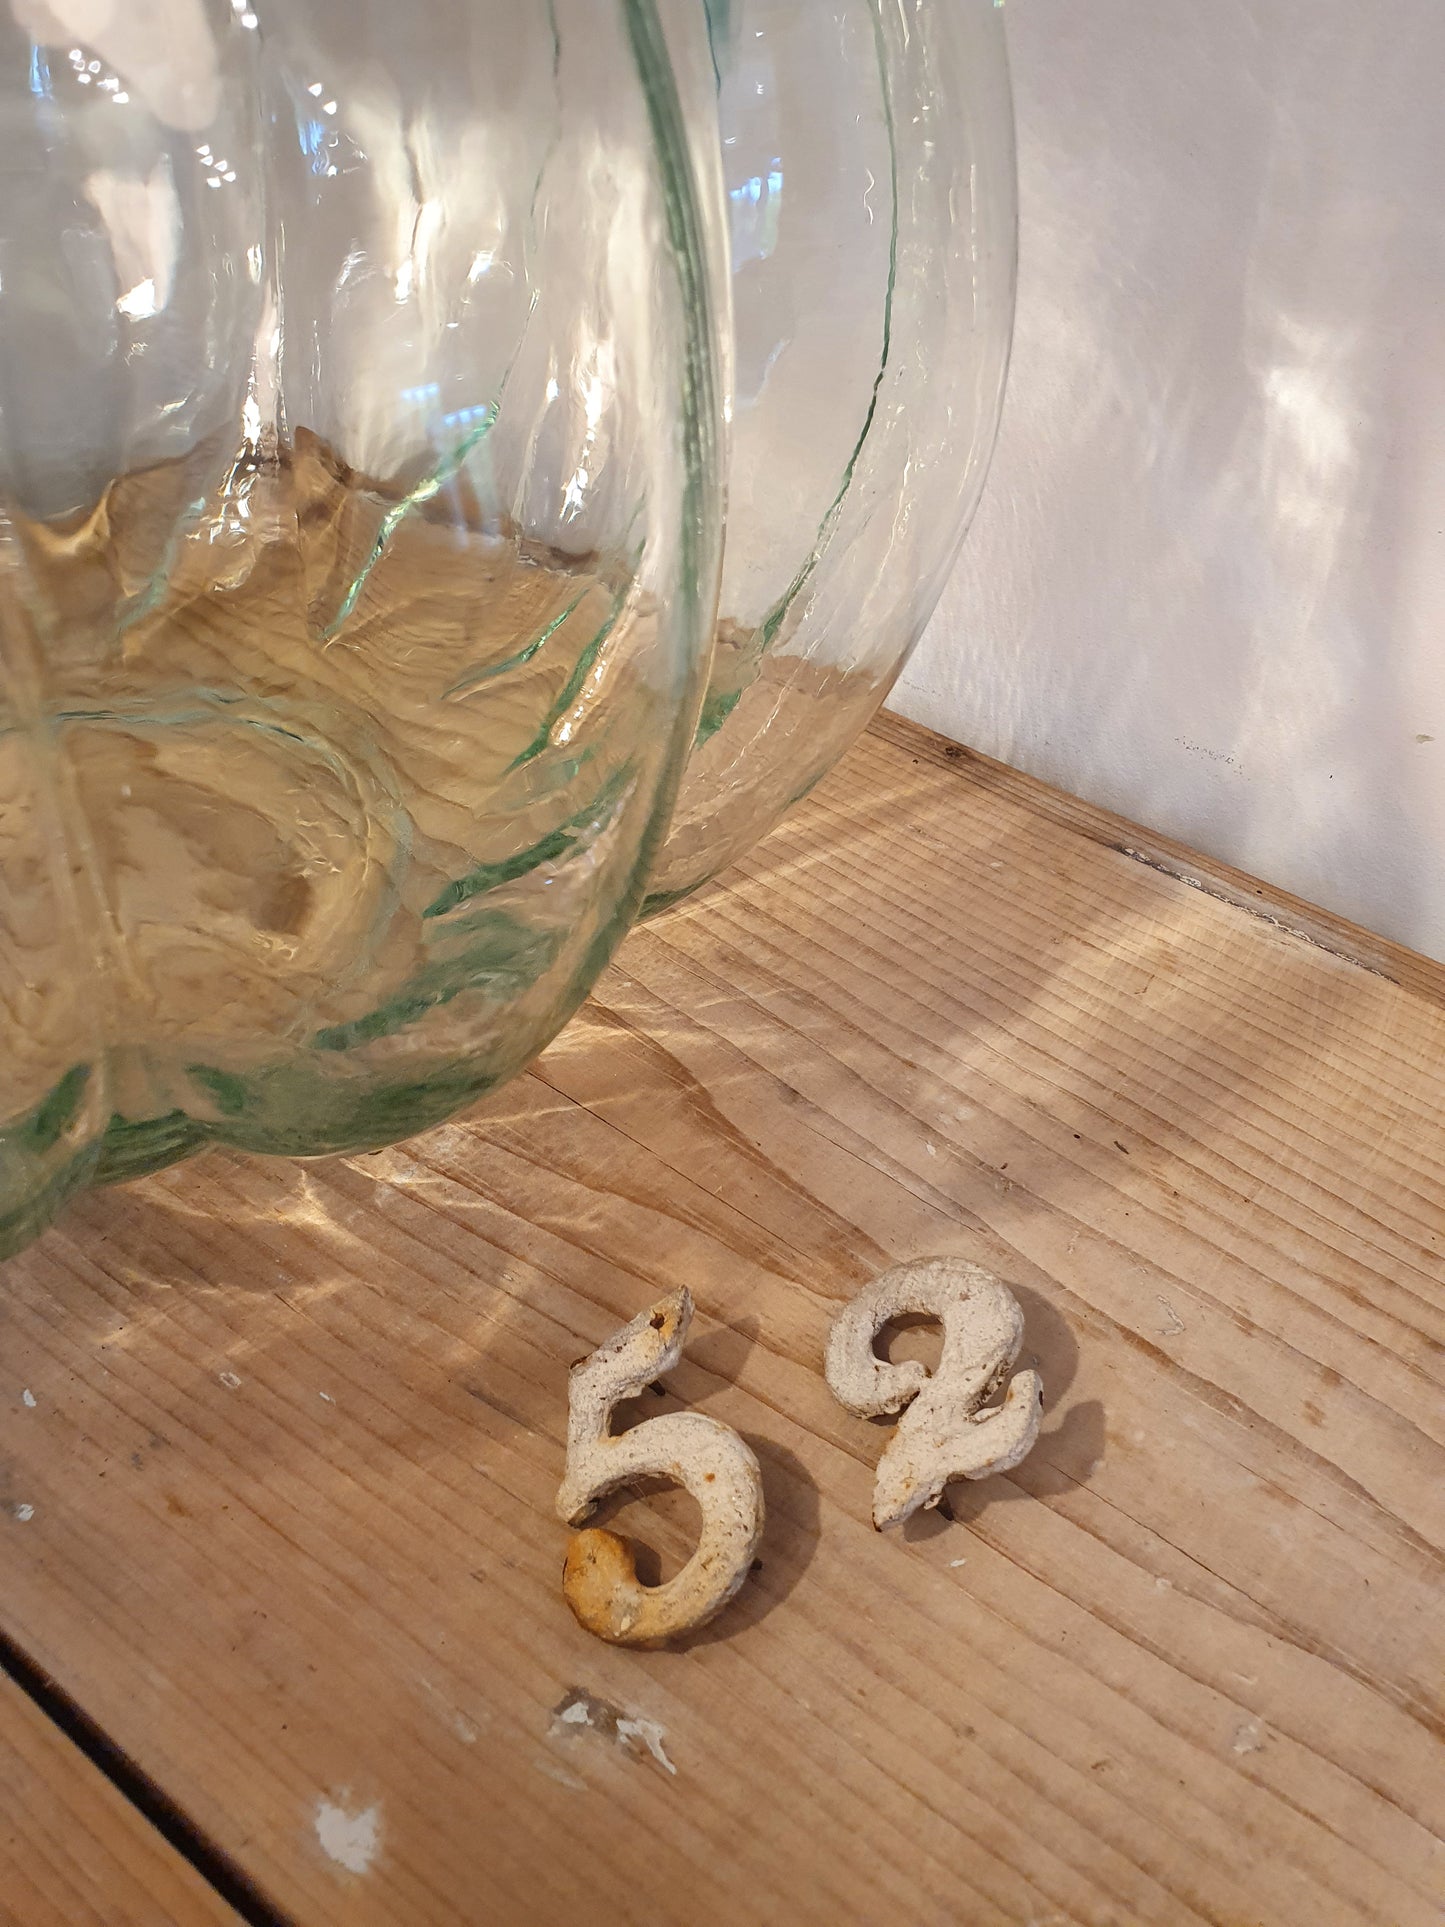 Cast Iron Numbers